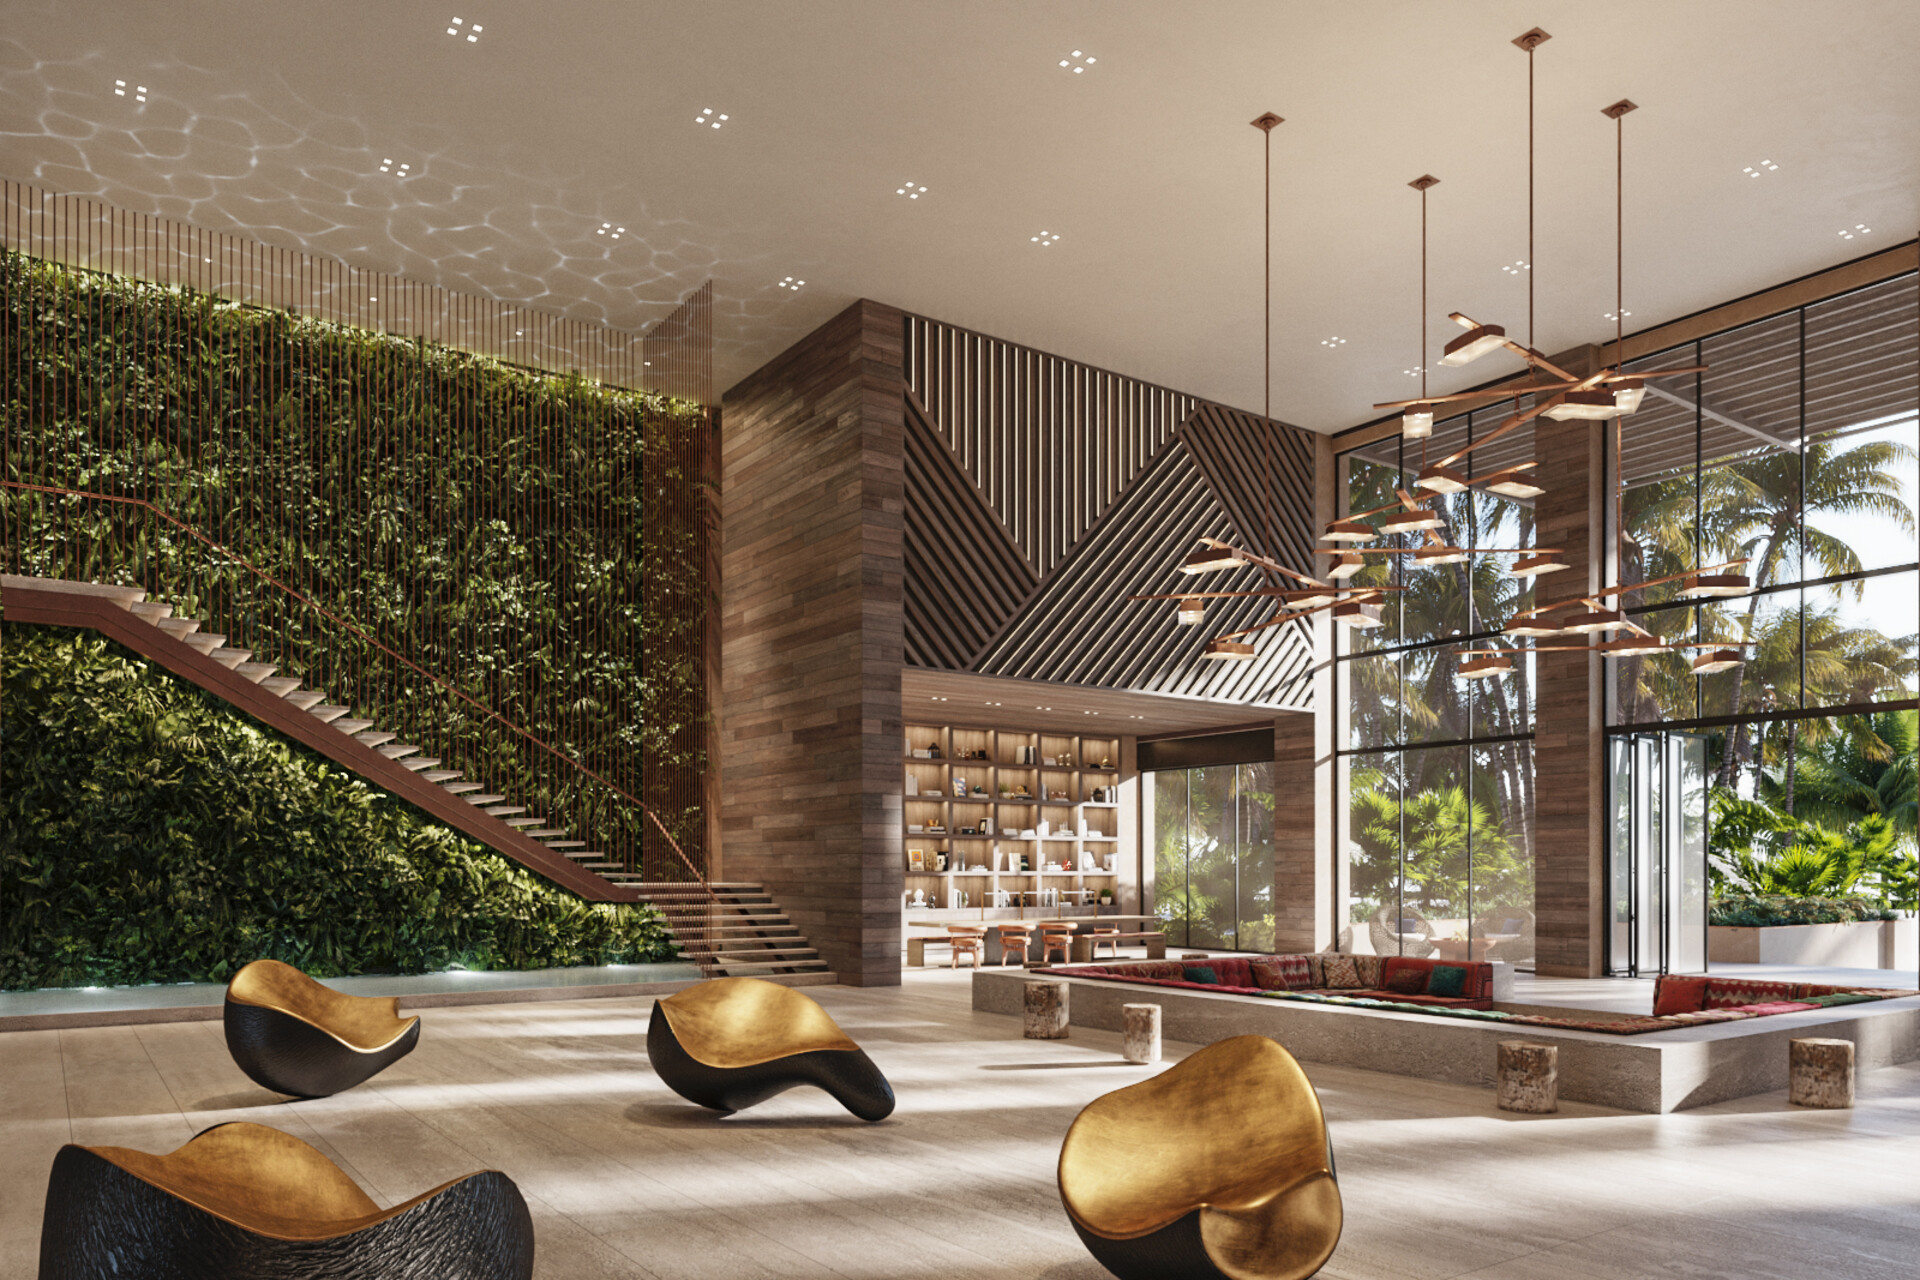 The well-appointed lobby of the Grand Hyatt Grand Cayman Residences, with gold seating and a verdant wall of tropical plants